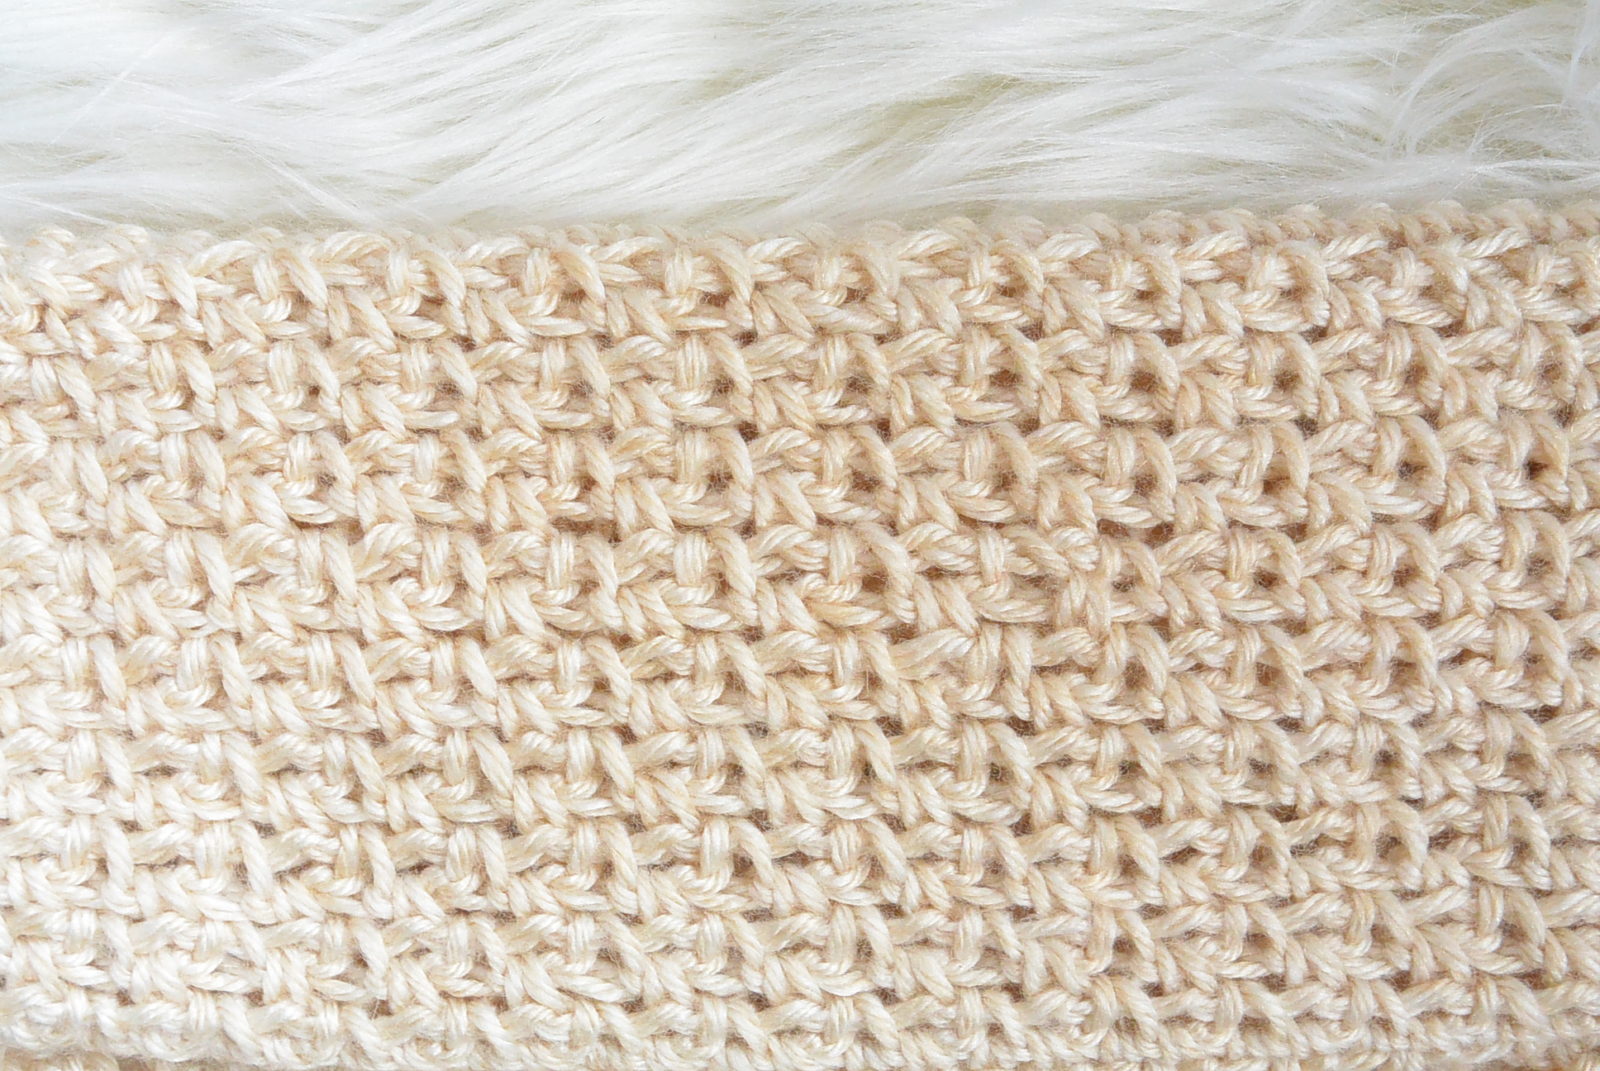 How To Crochet the Granite or Moss Stitch